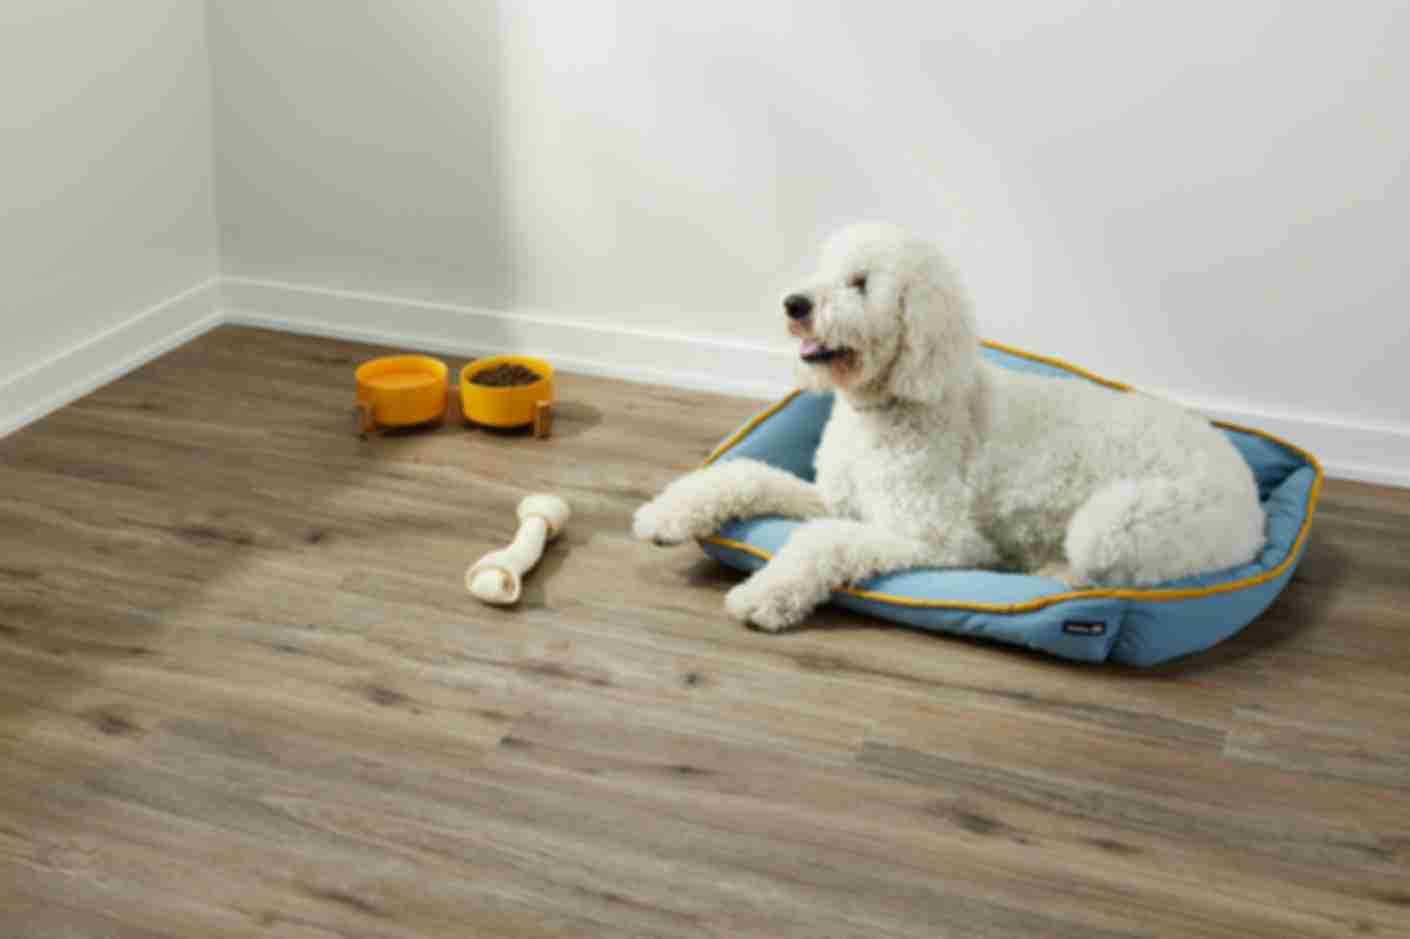 A large white dog rests on a blue dog bed, next to a bone and food and water bowls. The floor under the dog bed is covered in luxury vinyl wood-look planks.